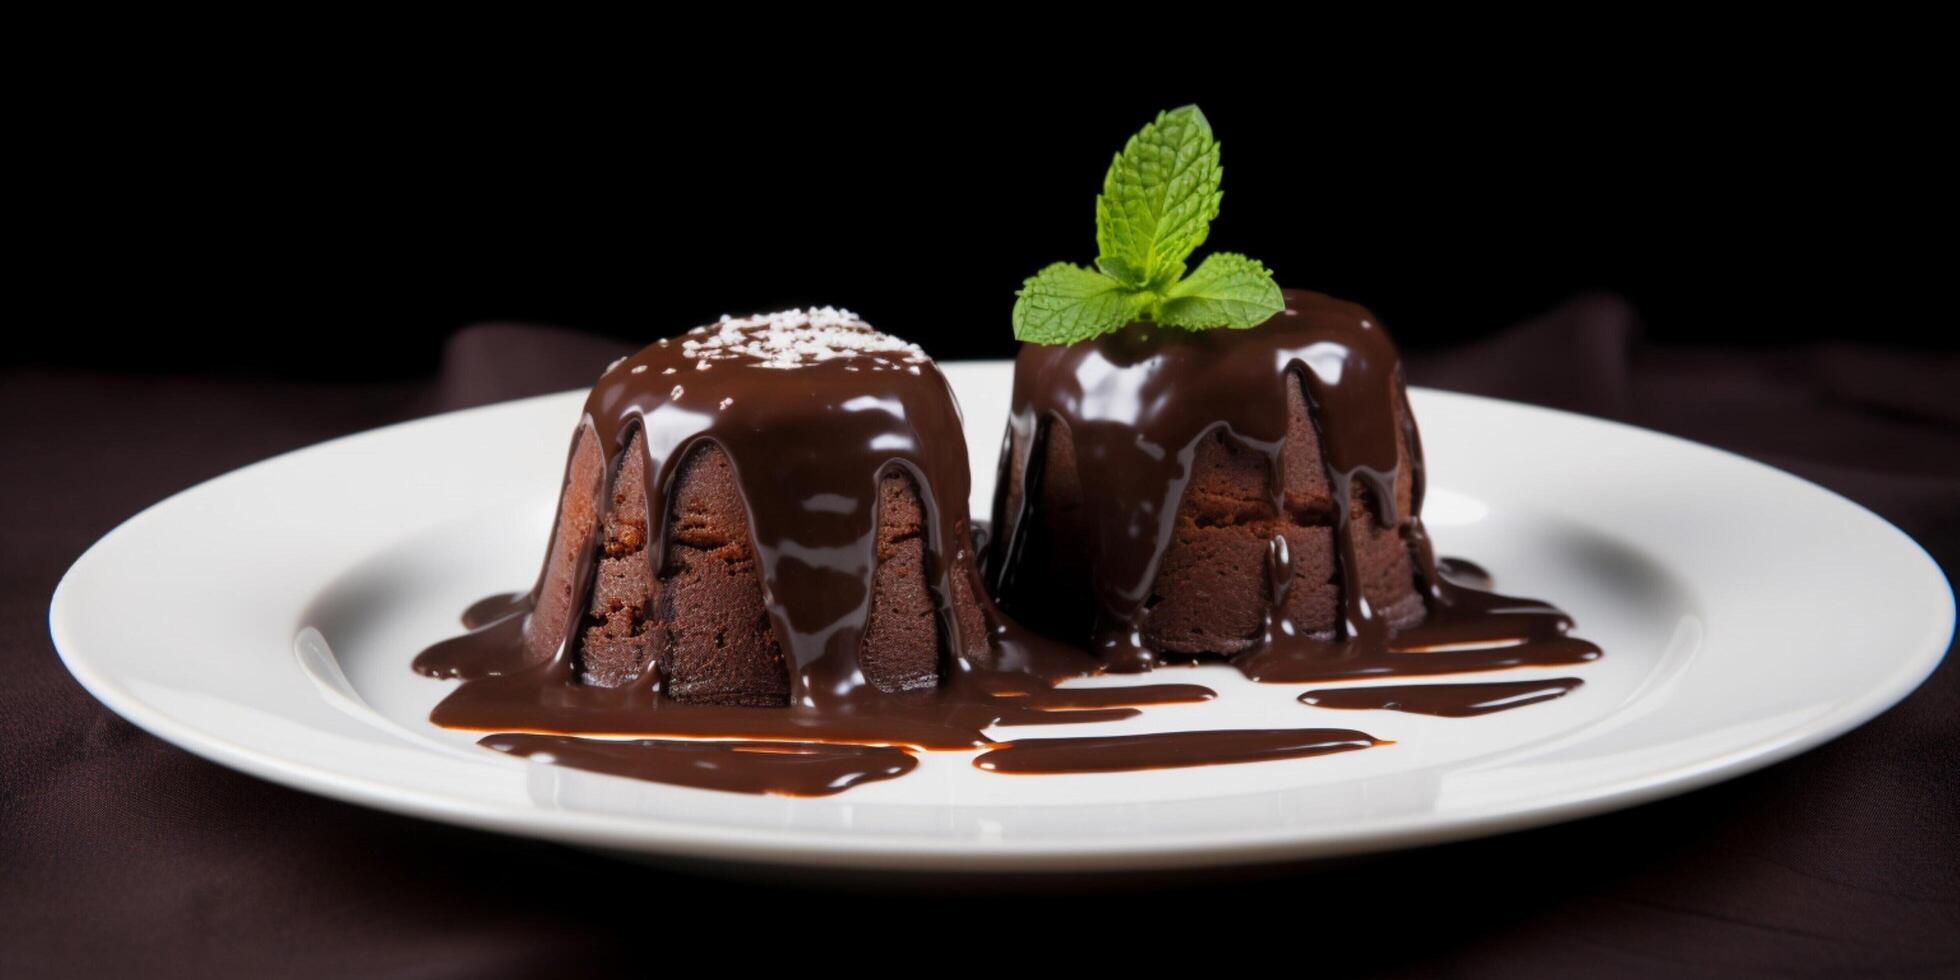 Plate of chocolate dessert with chocolate syrup photo